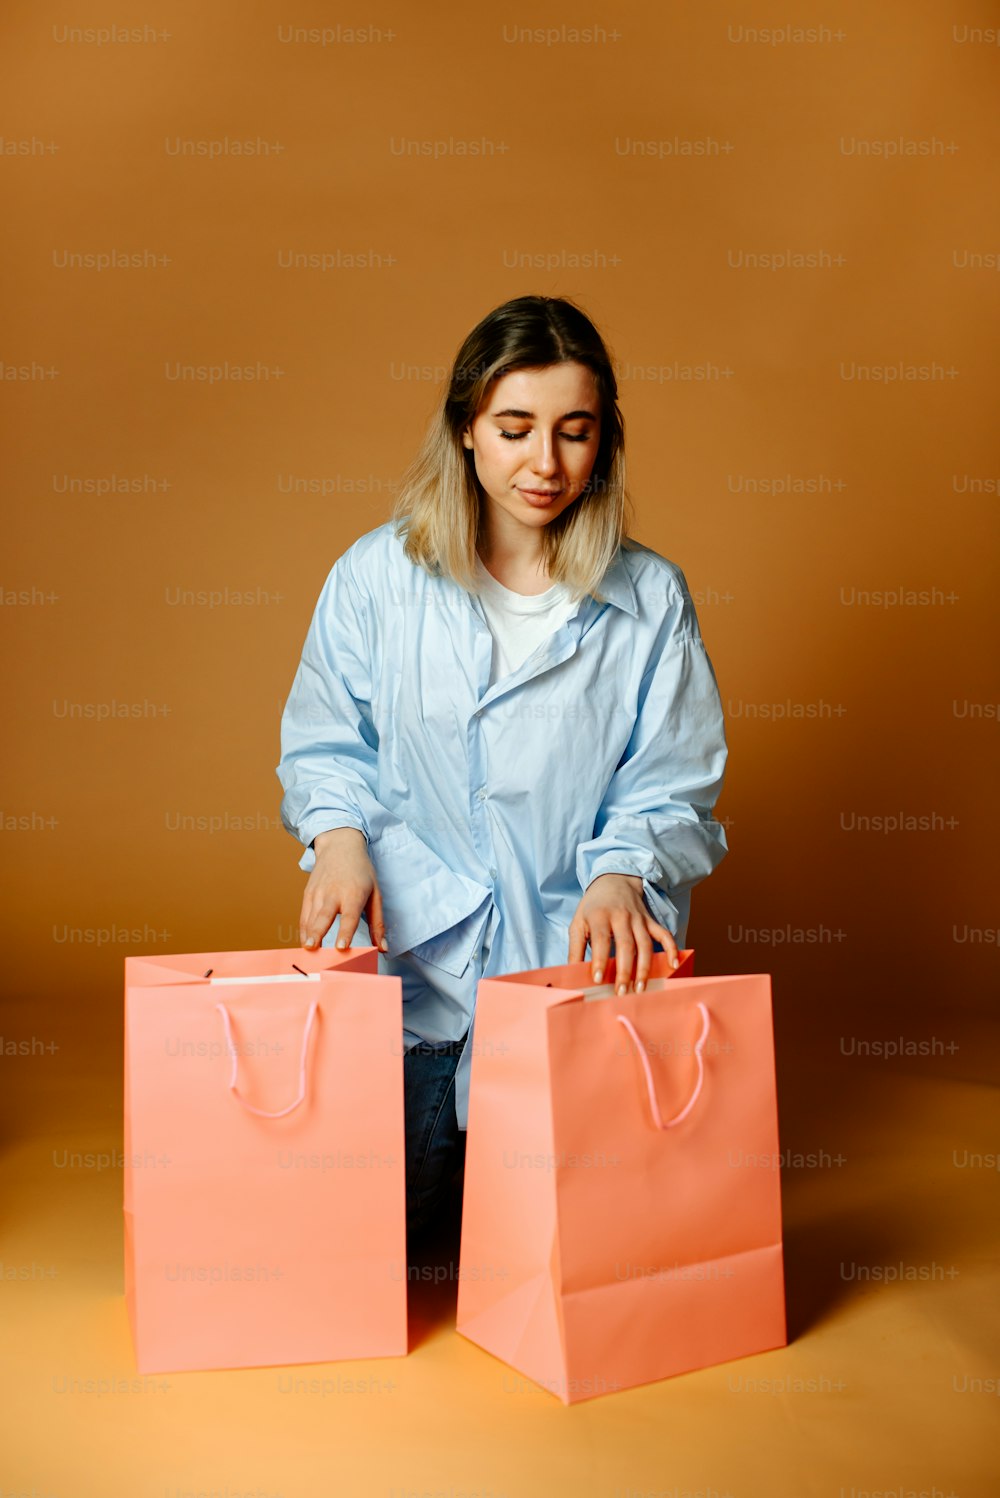 a woman in a blue shirt is holding two pink bags